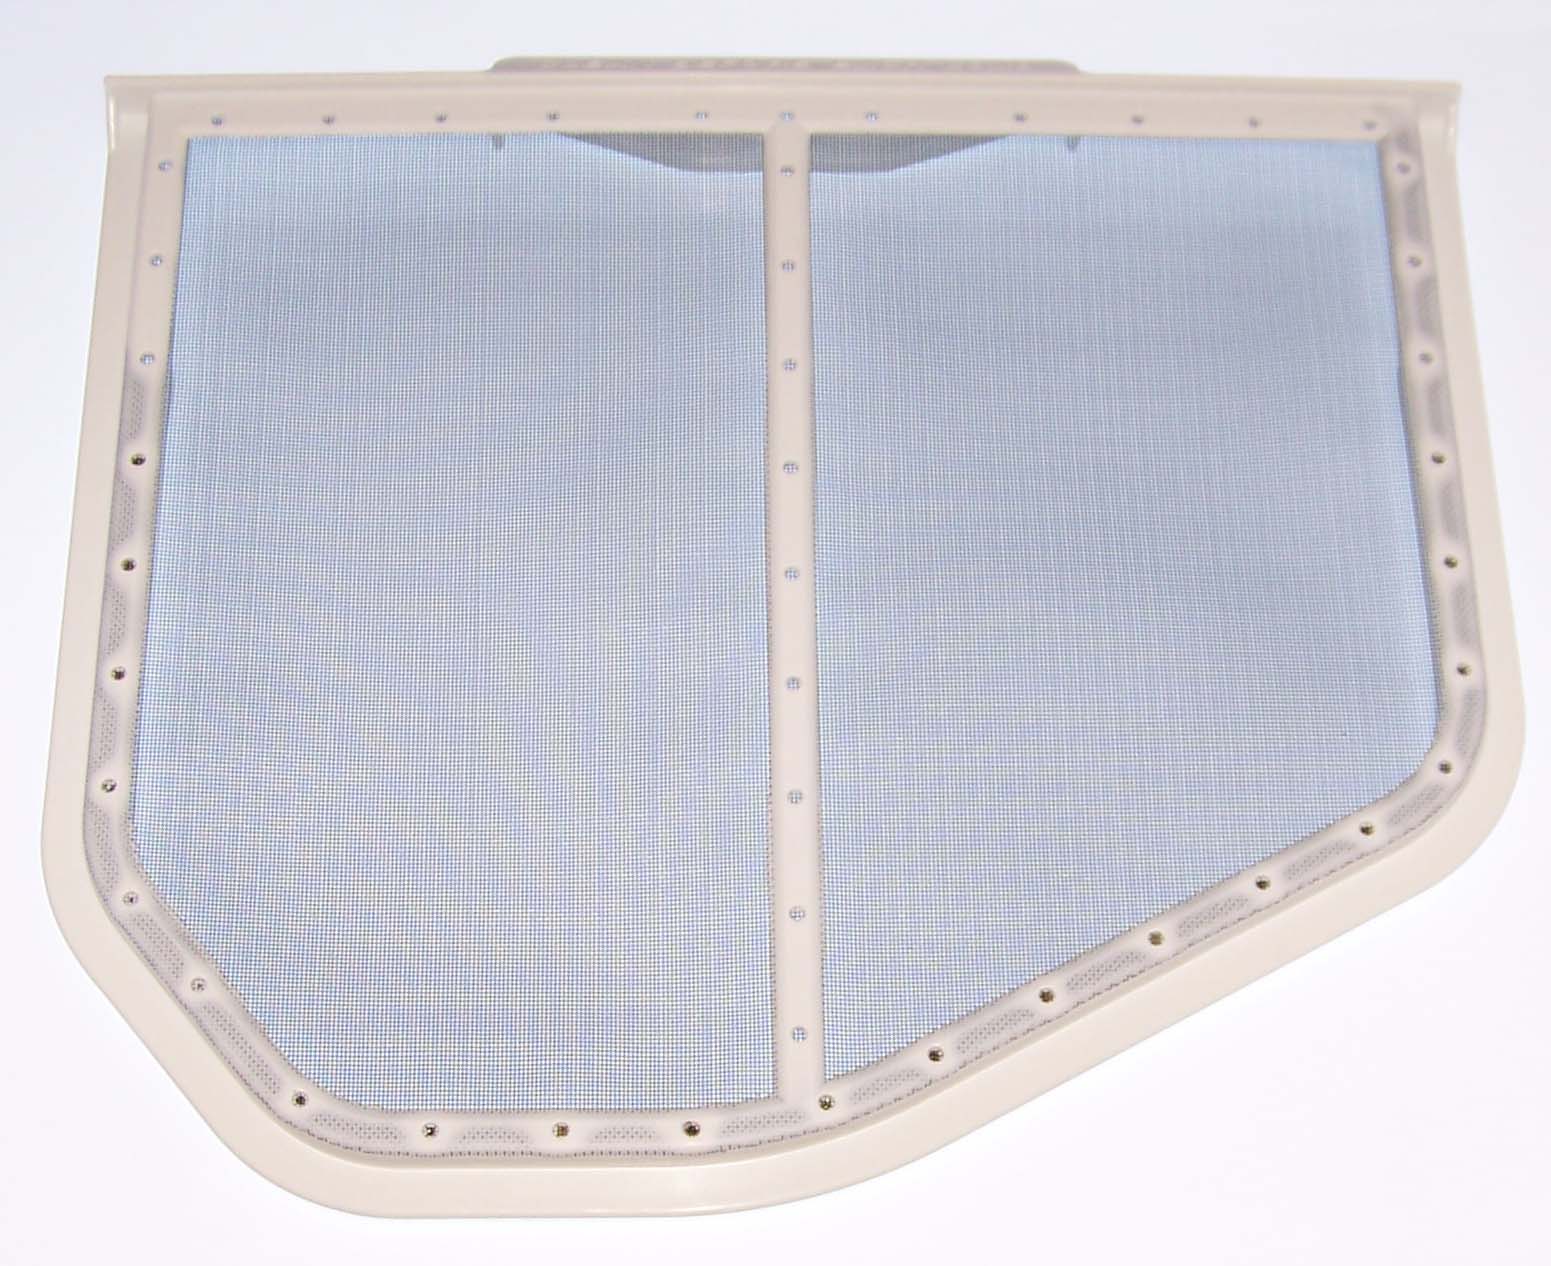 Maytag NEW OEM Maytag Dryer Lint Trap Filter Originally Shipped With MEDE500WJ0, MGDE400XW1, MLE20PRBZW0, MED9800TK0